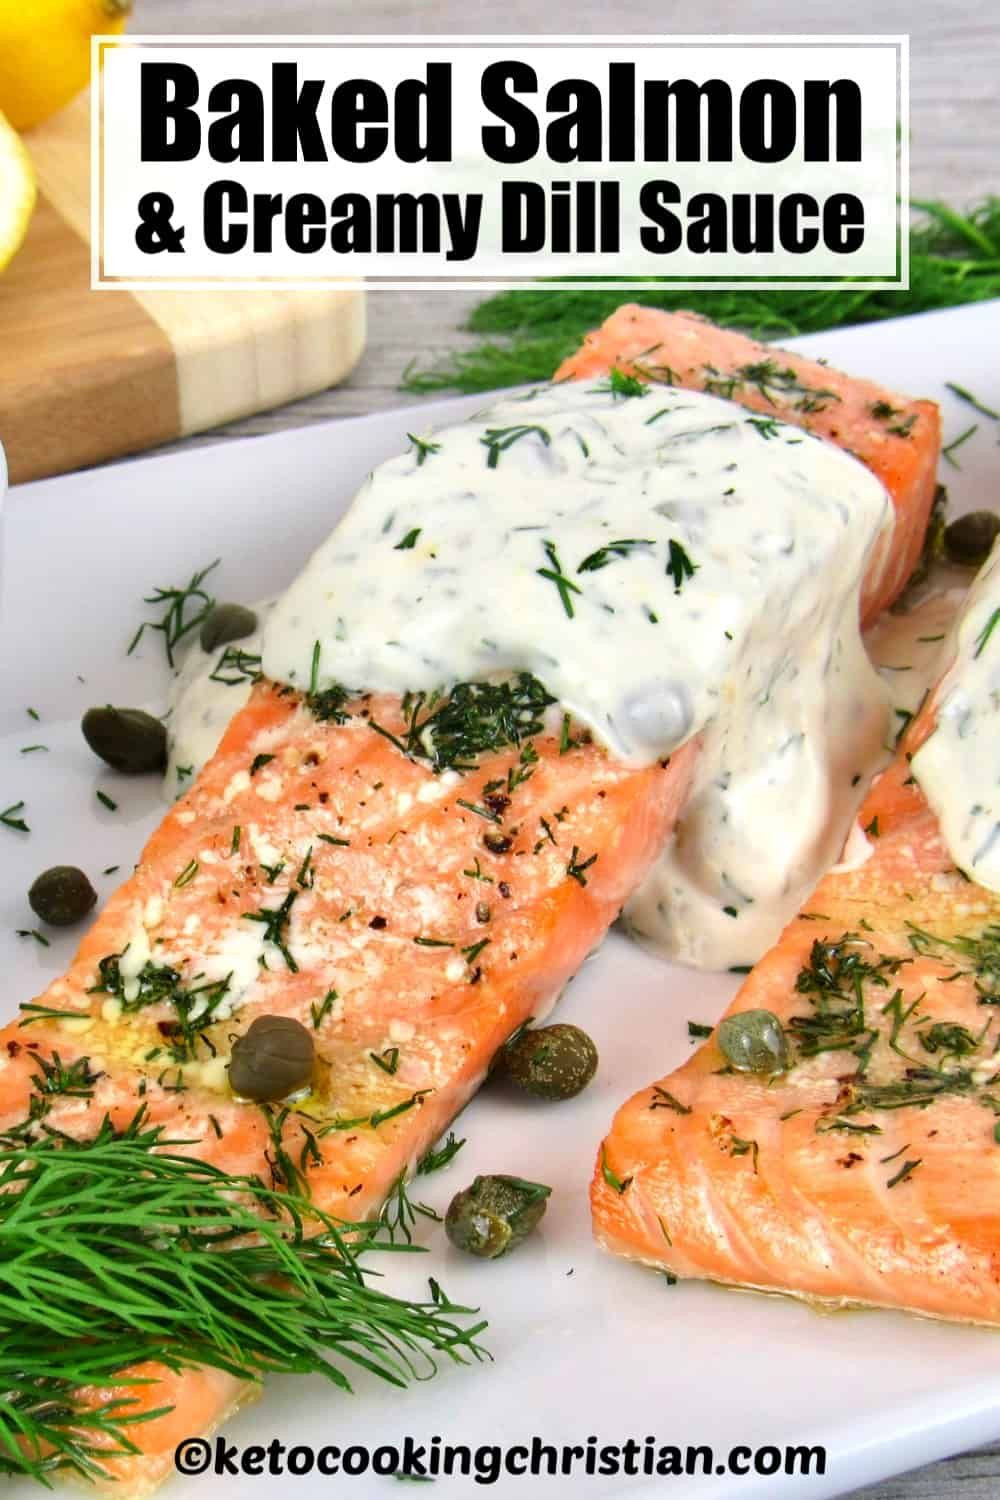 Oven Baked Salmon Keto
 Baked Salmon with Creamy Dill Sauce Keto and Low Carb